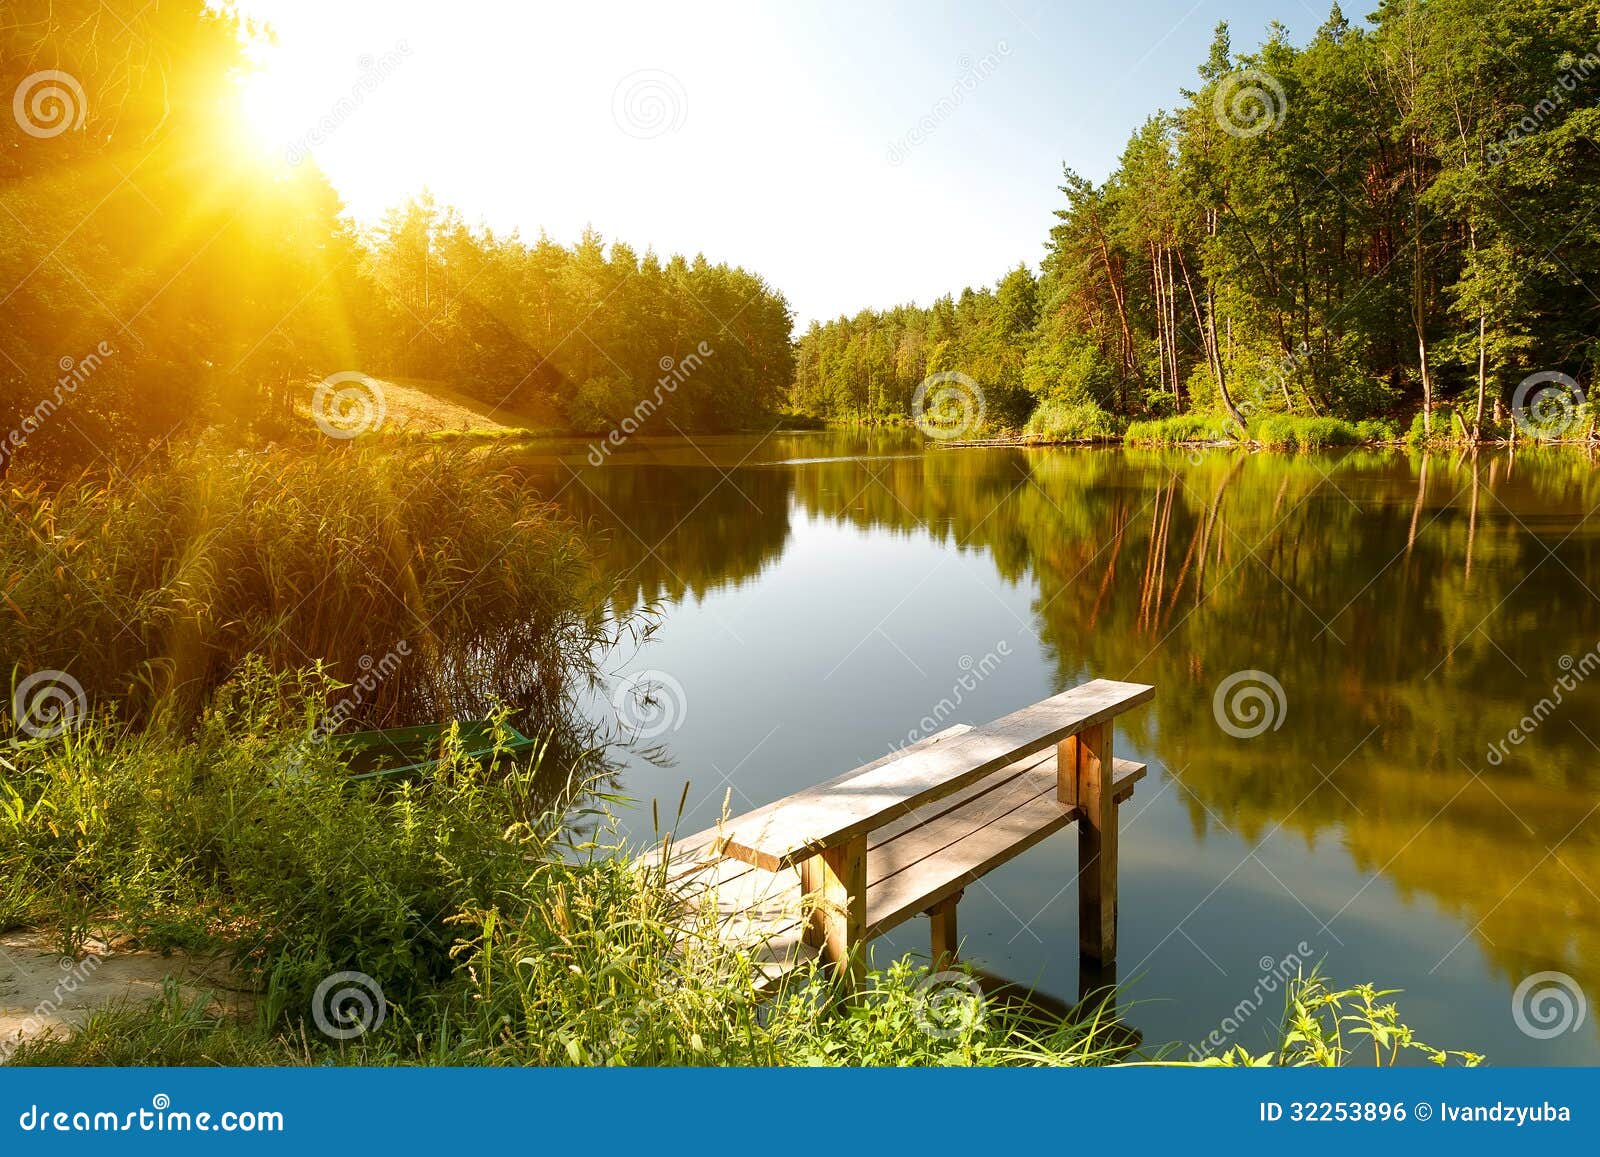 summer landscape with forest lake